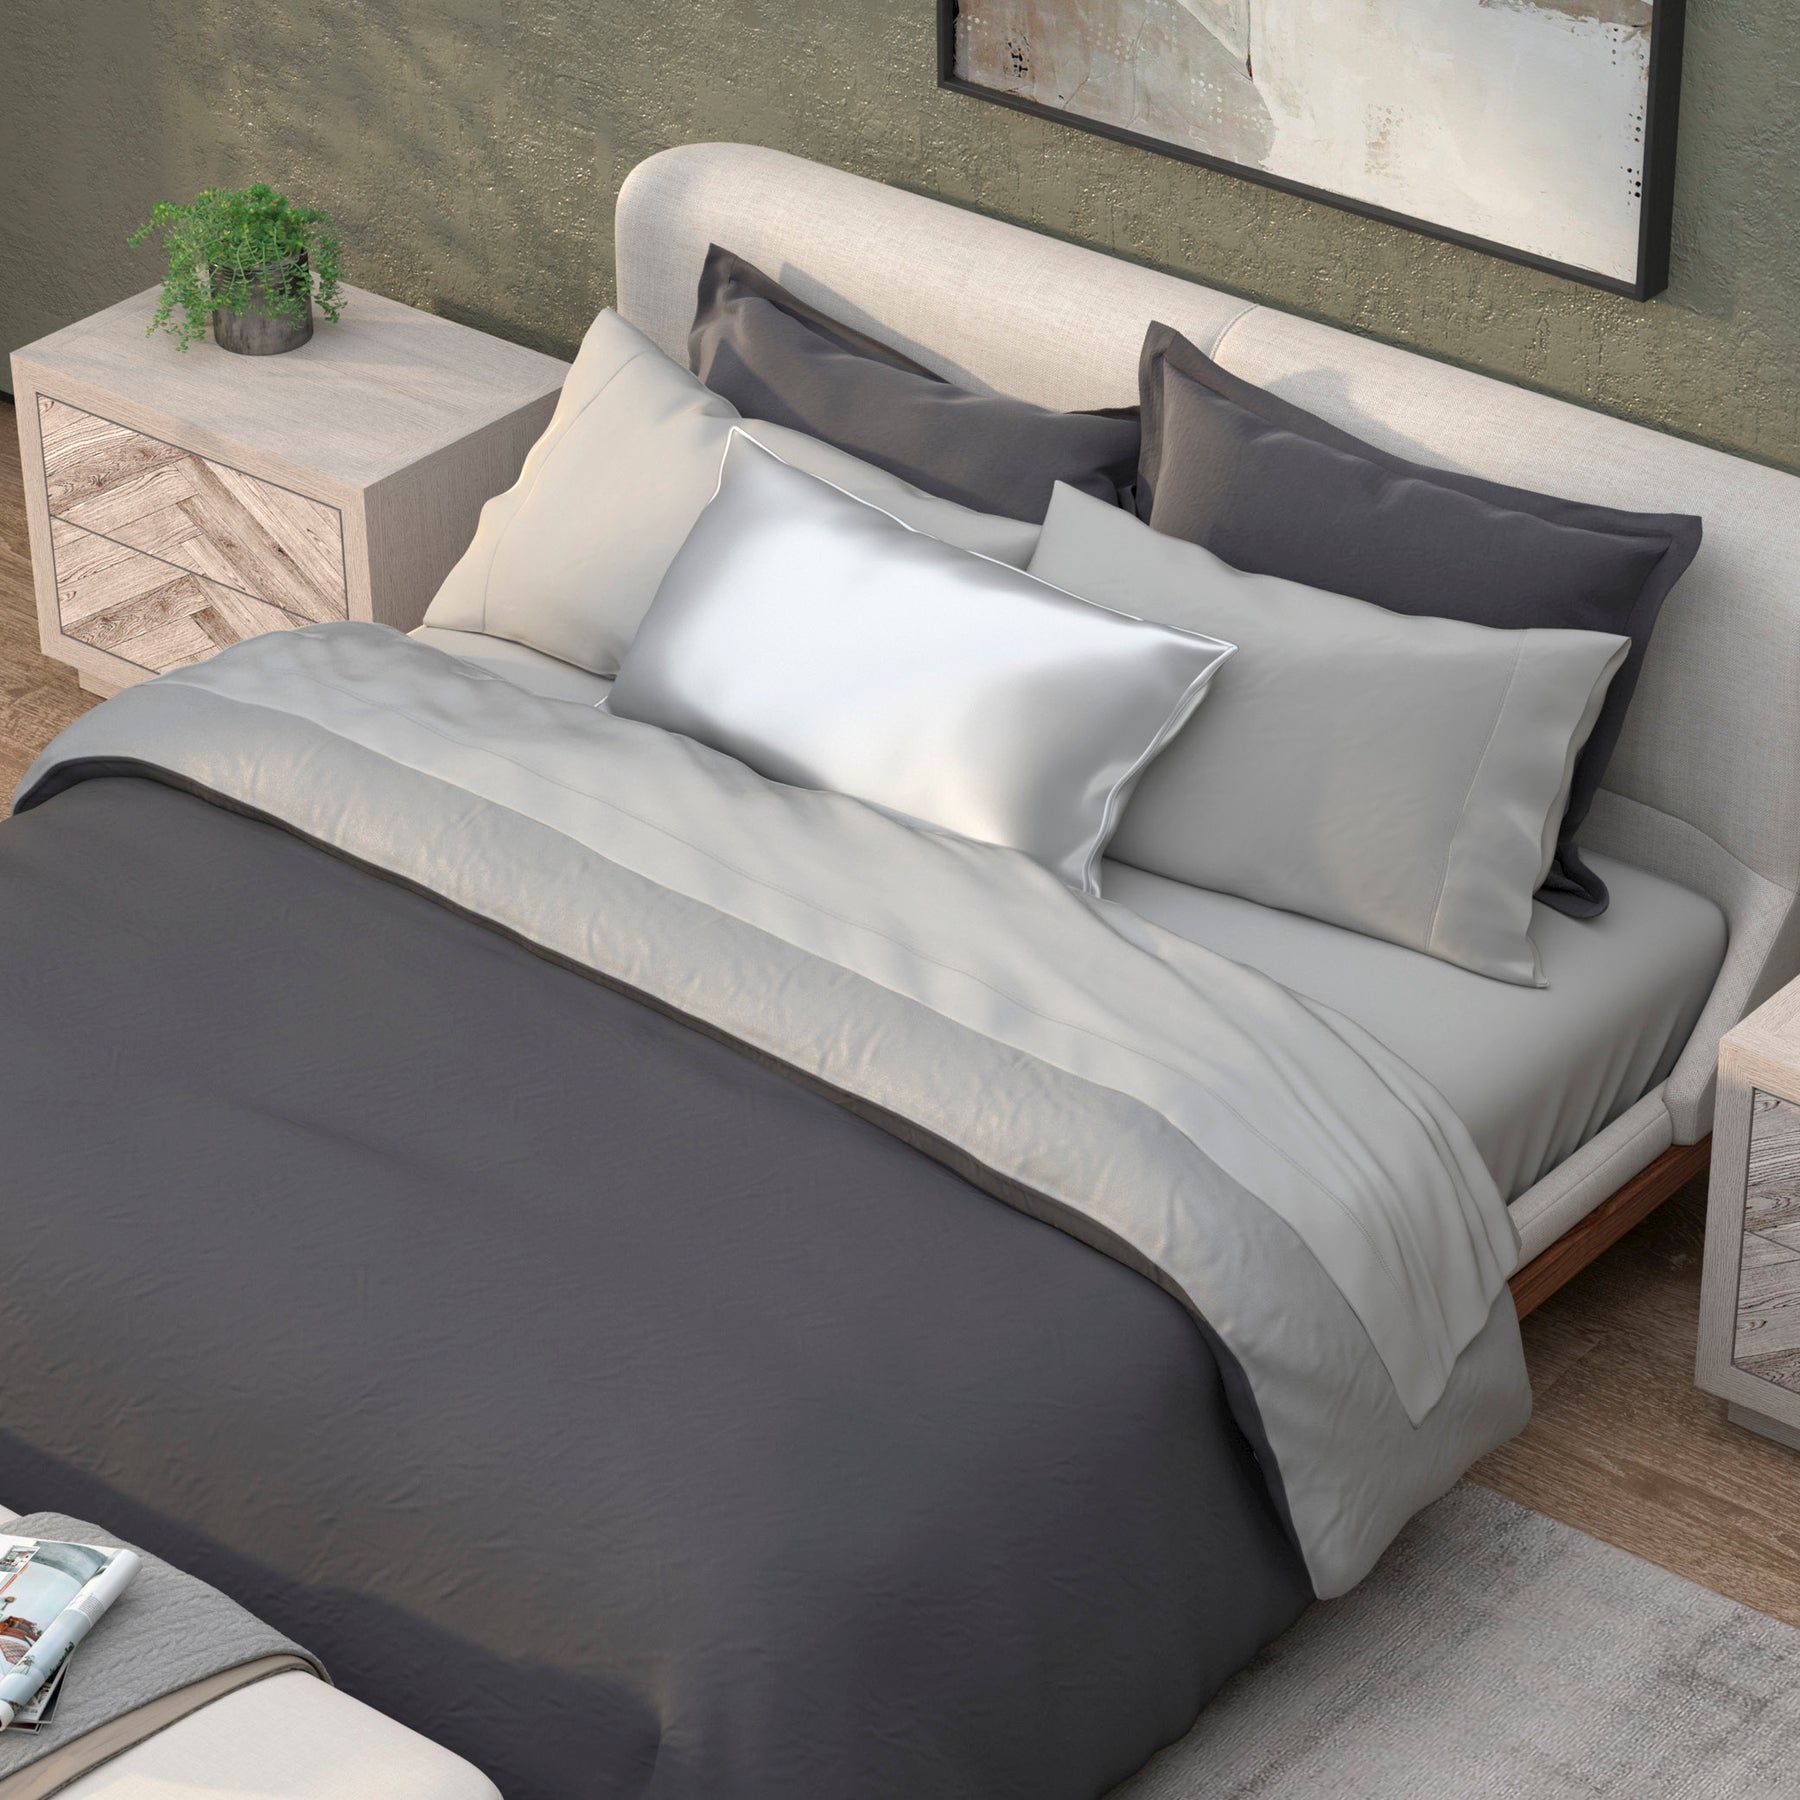 Image of a neatly made bed with the Dove Gray Soft Touch Bundle 